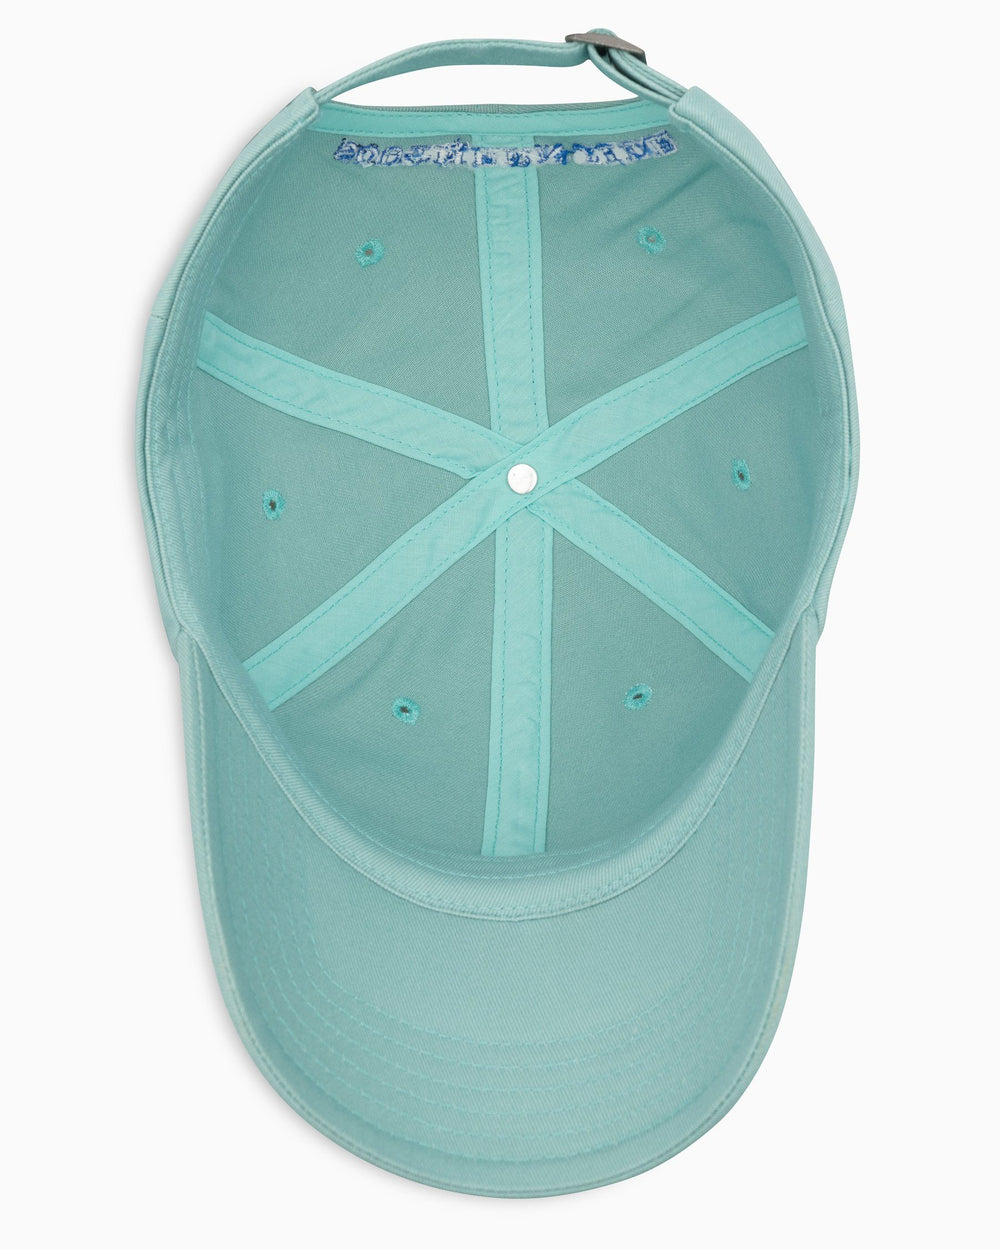 The inside of the Skipjack Hat by Southern Tide - Wake Blue